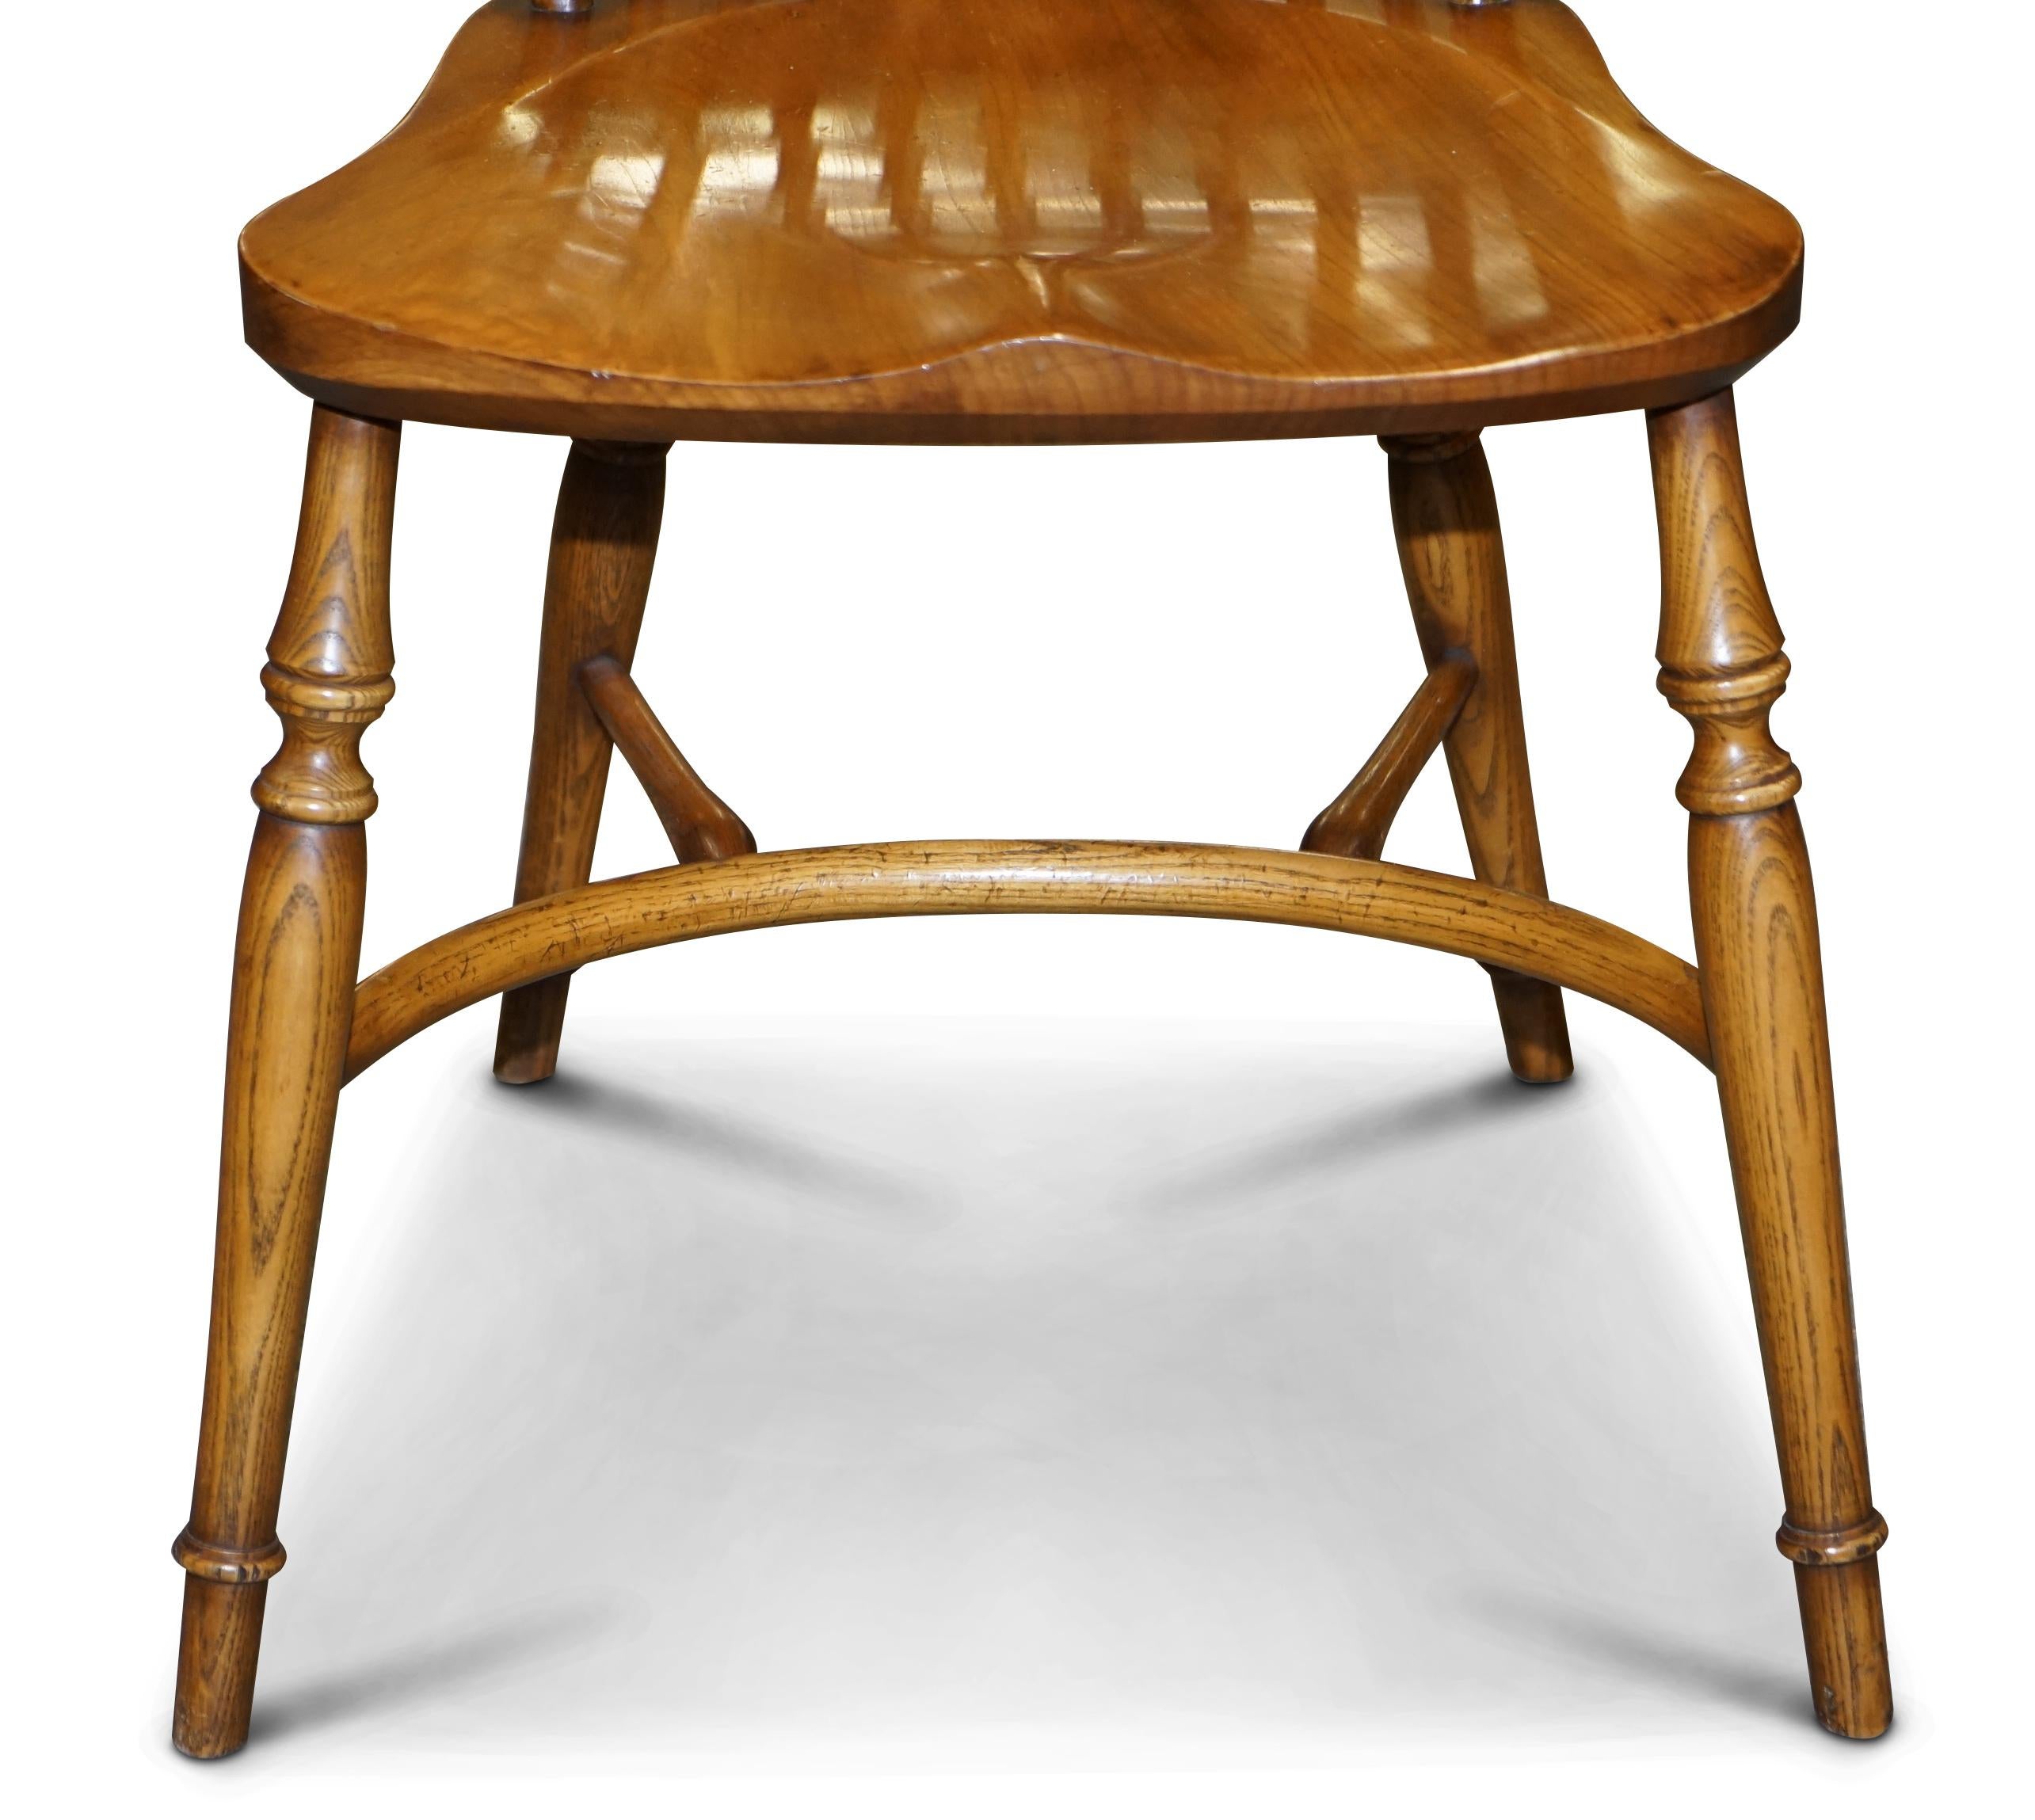 Stewart Linford Burr Yew & Elm Dining Table & 8 Windsor Chairs Handmade, England For Sale 7